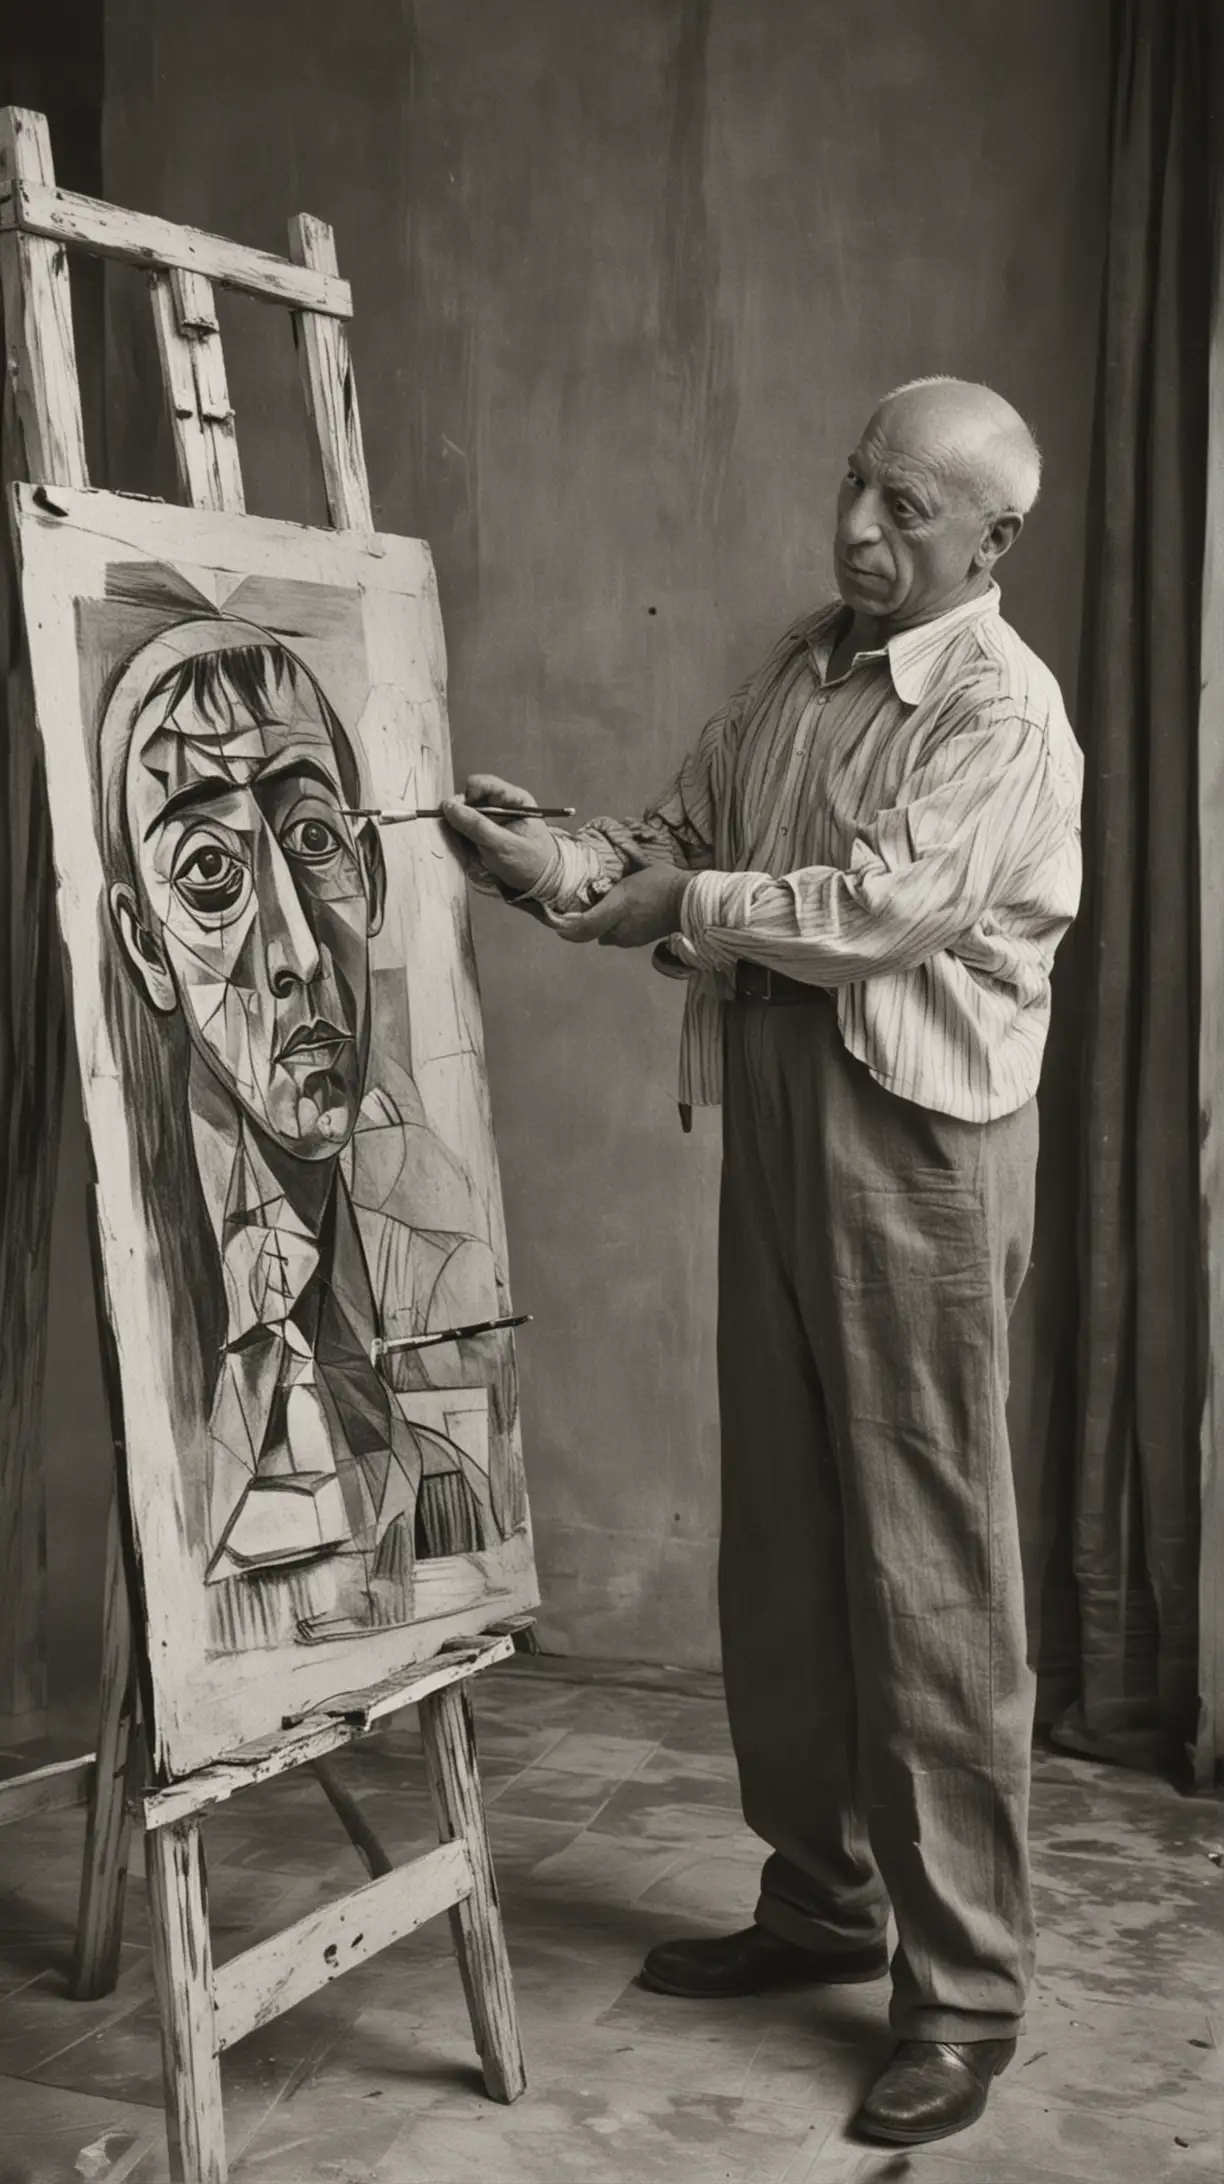 Pablo Picasso Painting in His Studio during the 20th Century